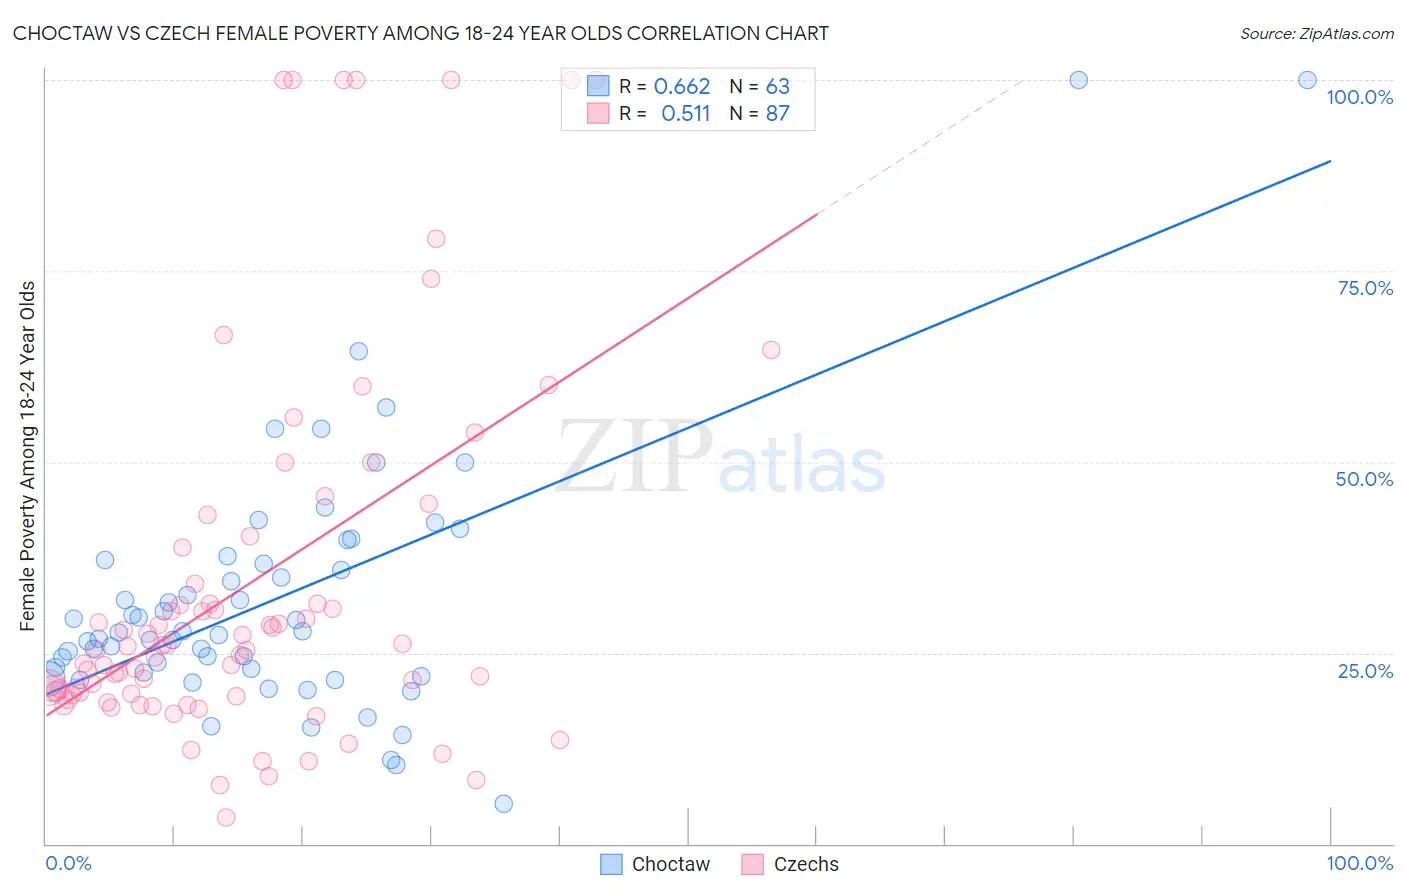 Choctaw vs Czech Female Poverty Among 18-24 Year Olds